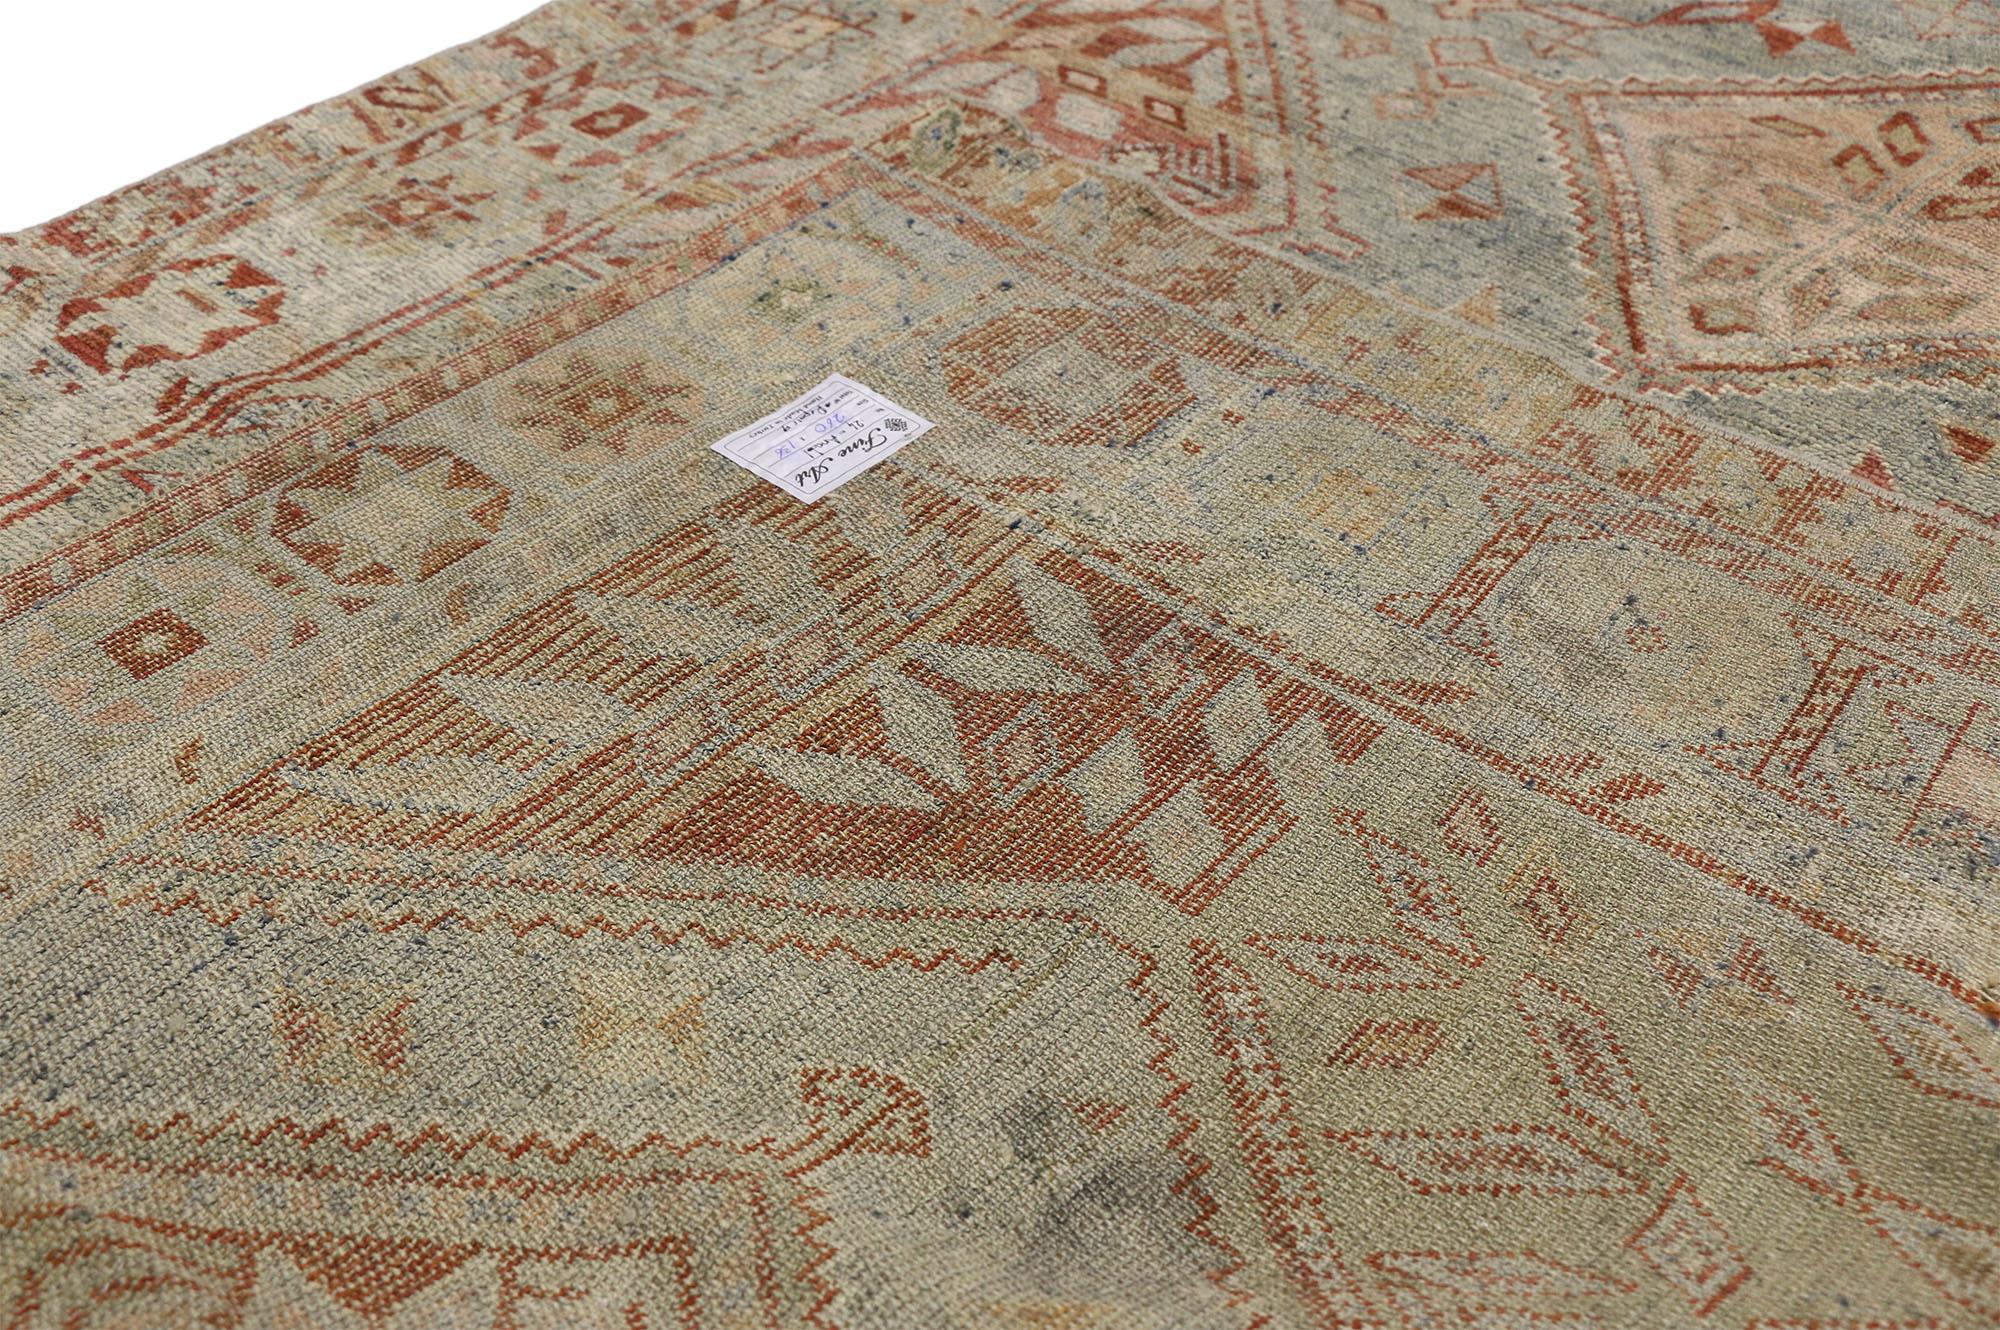 Turkish Antique Persian Shiraz Rug with Faded Earth-Tone Colors